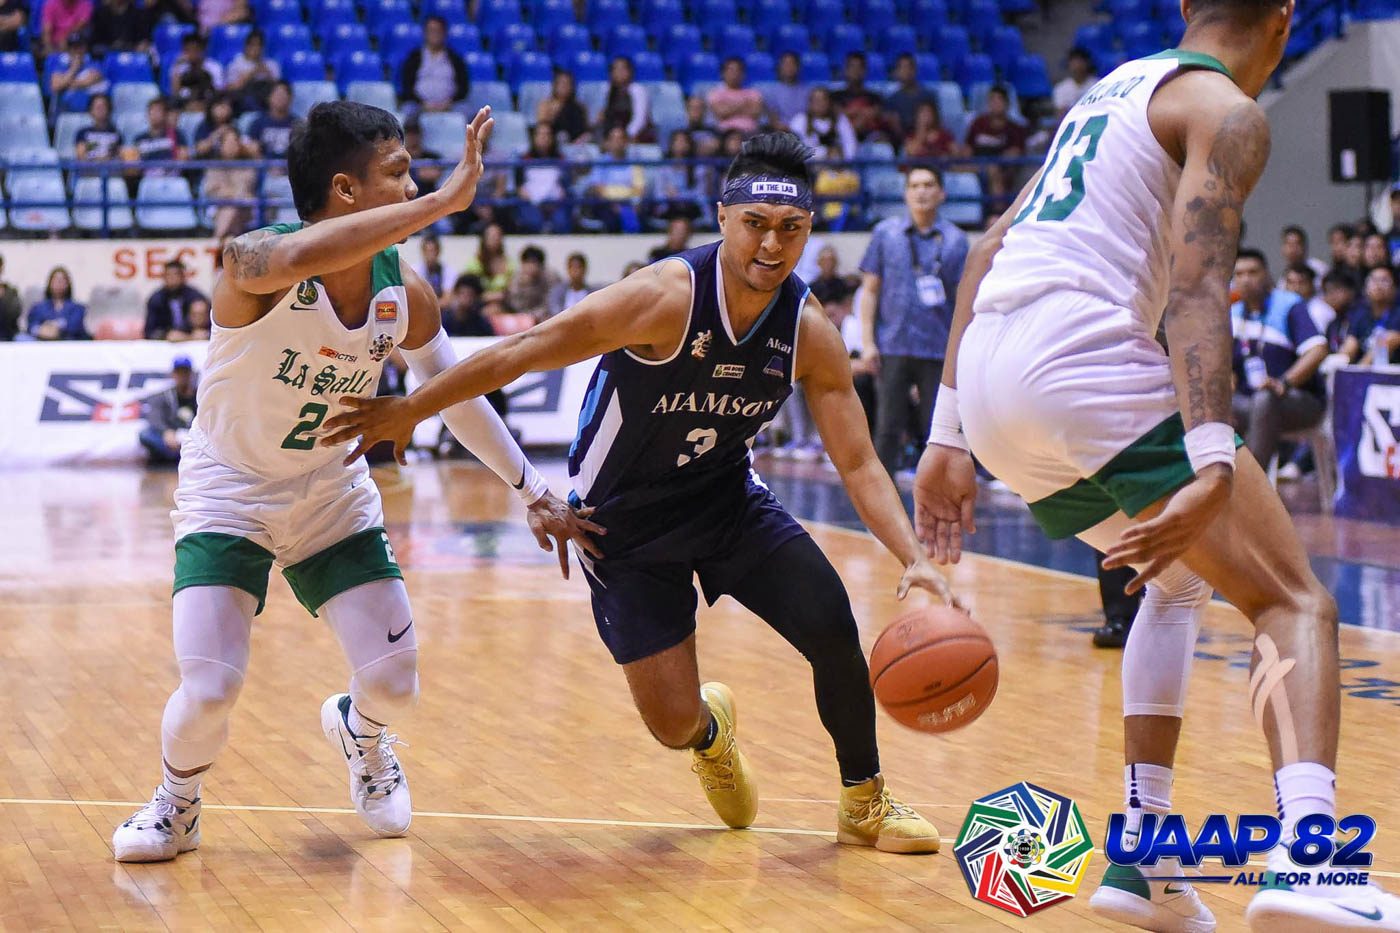 HEARTBREAKER. Adamson falls short even with Fil-Peruvian standout Val Chauca trying to carry his team in the final stretch. Photo release 